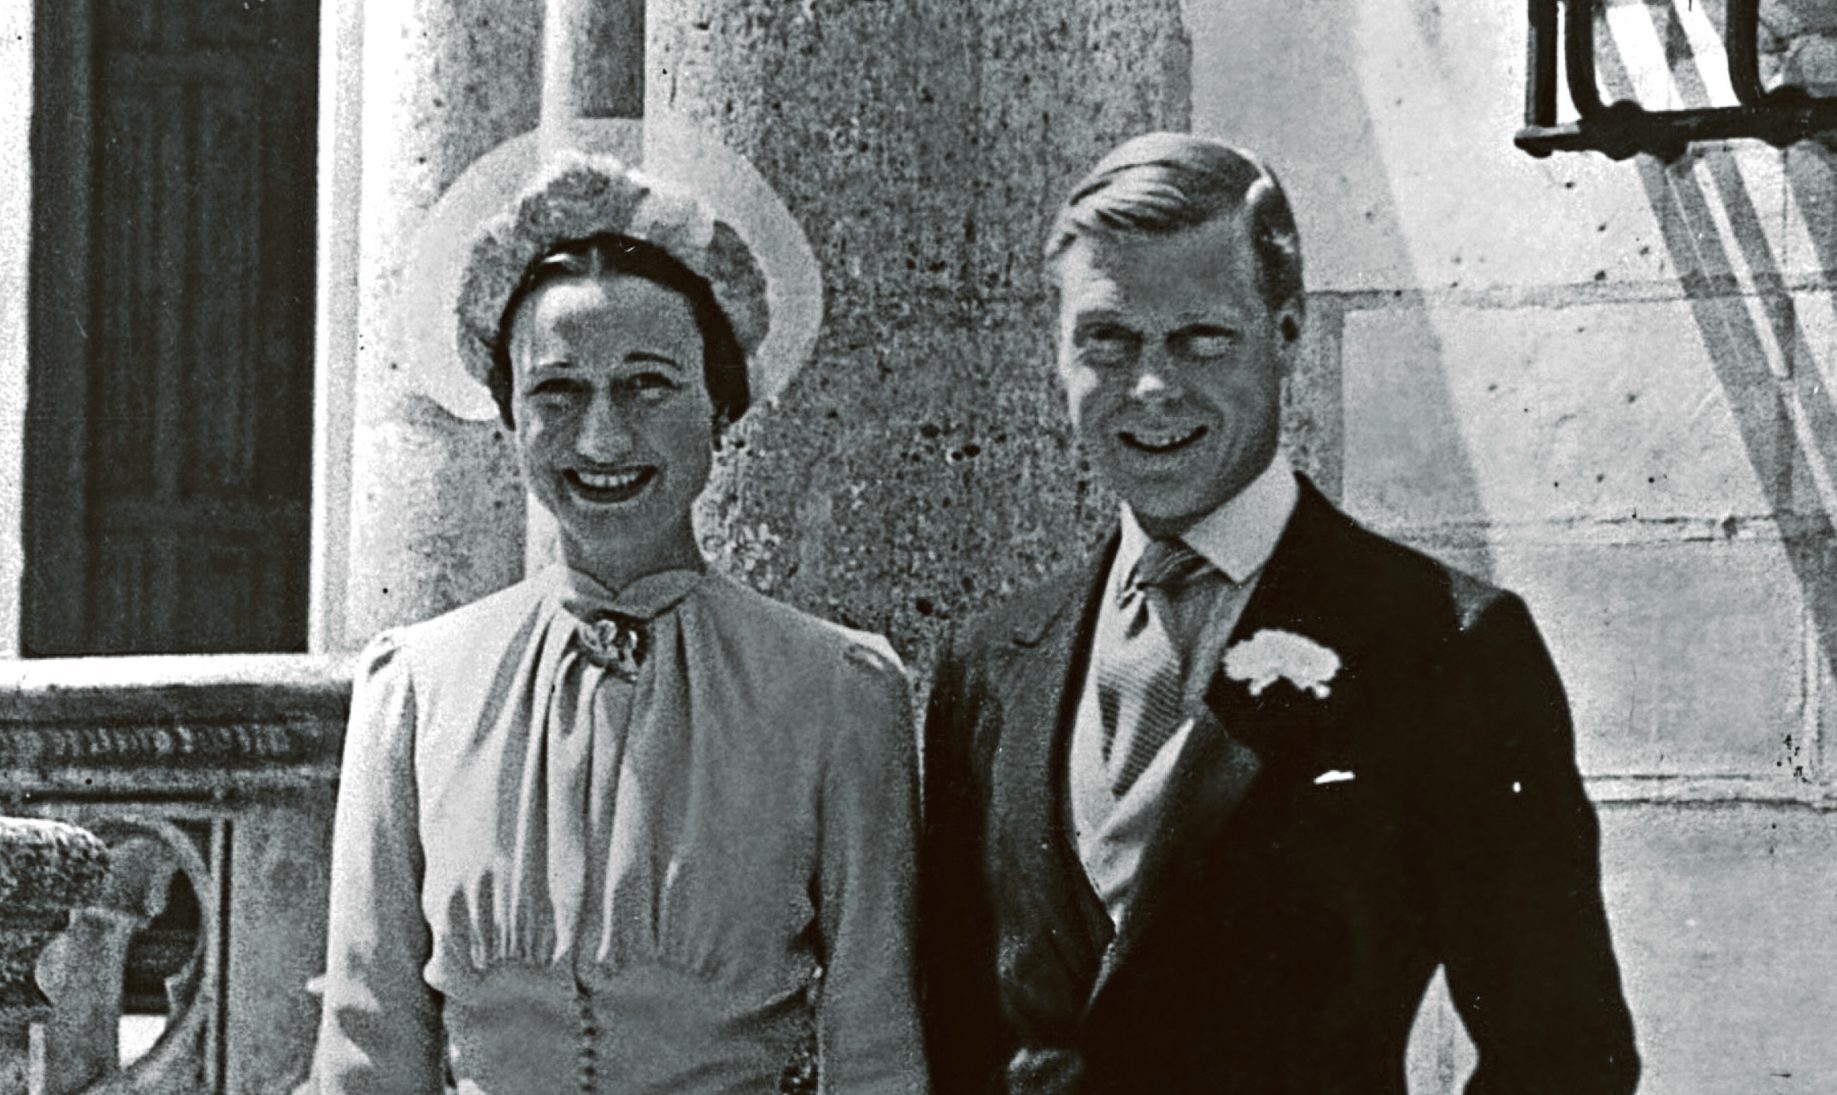 Duke of Windsor (1894 - 1972) and Mrs Wallis Simpson (1896 - 1986) on their wedding day, 1937  (Central Press/Getty Images)